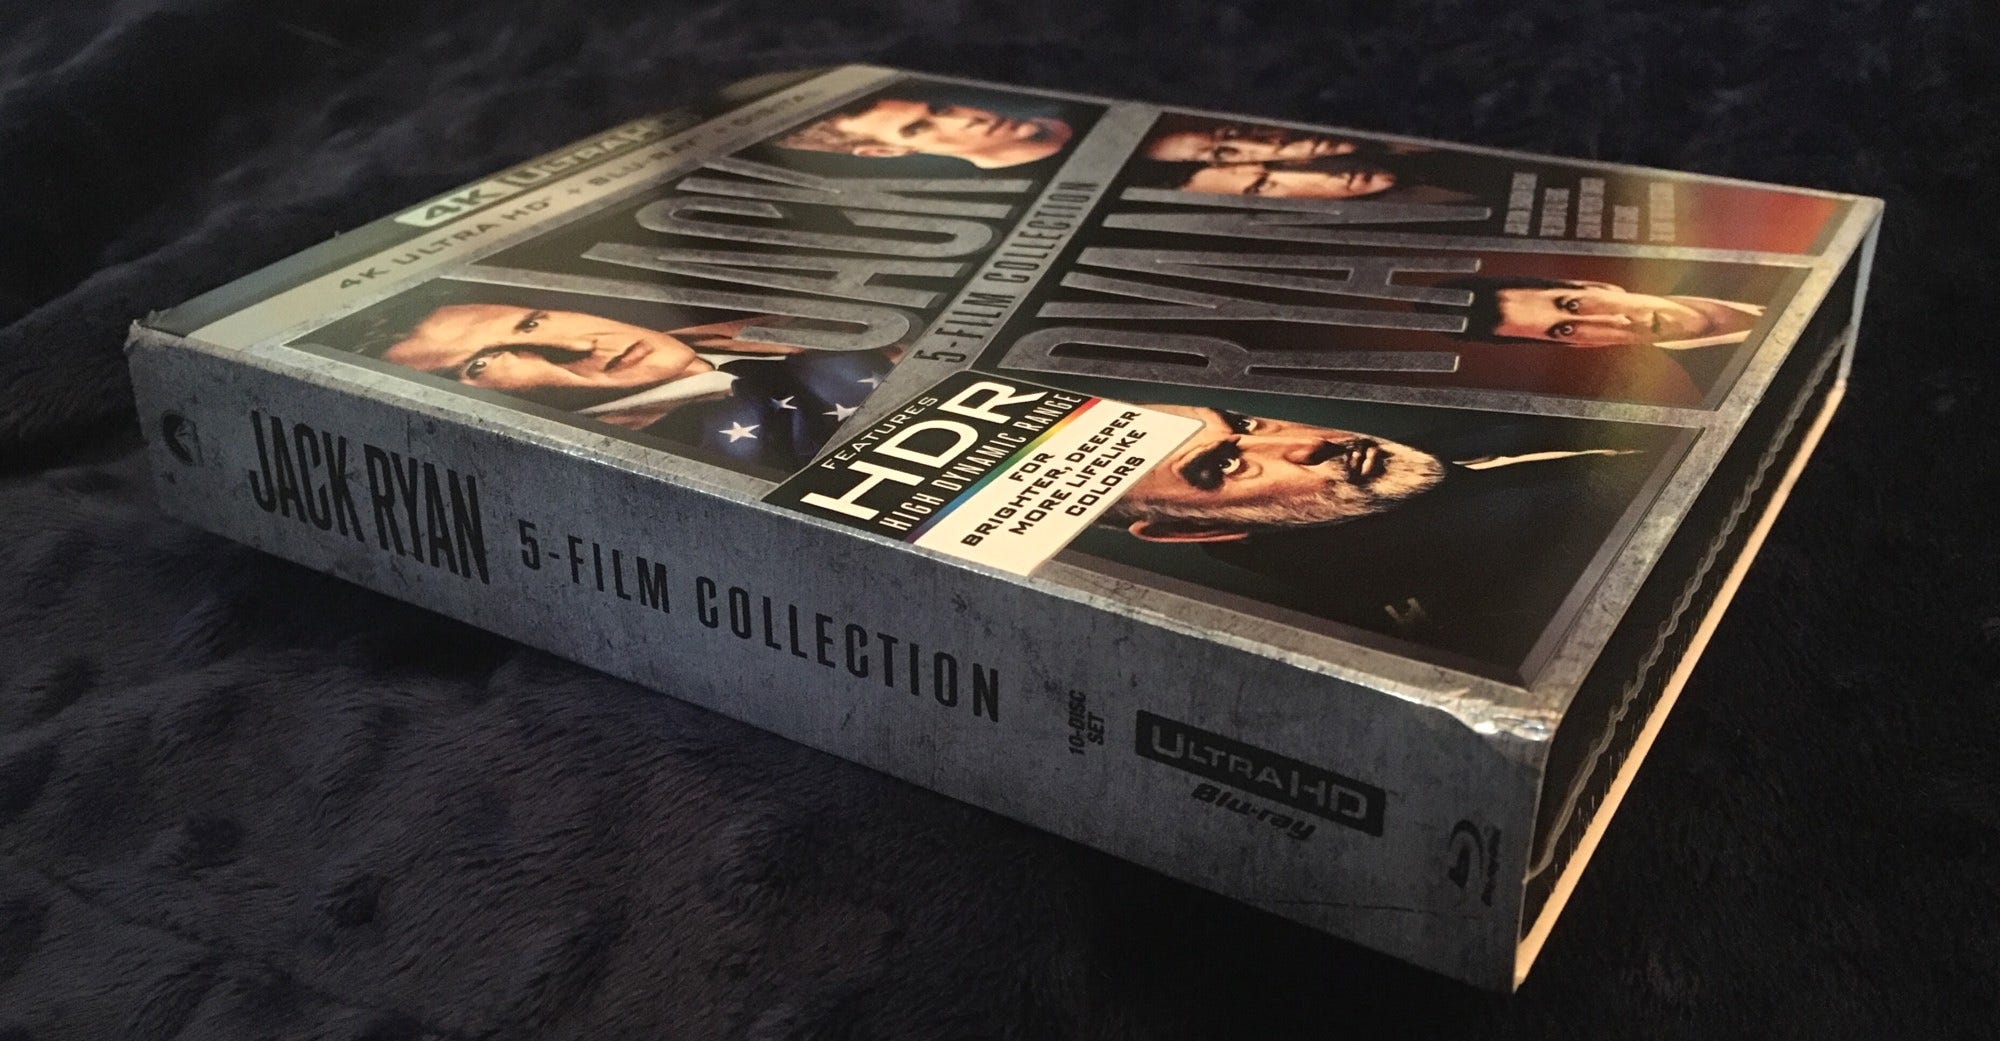 Jack Ryan 5-Film Collection 4K BLU RAY REVIEW + Unboxing 